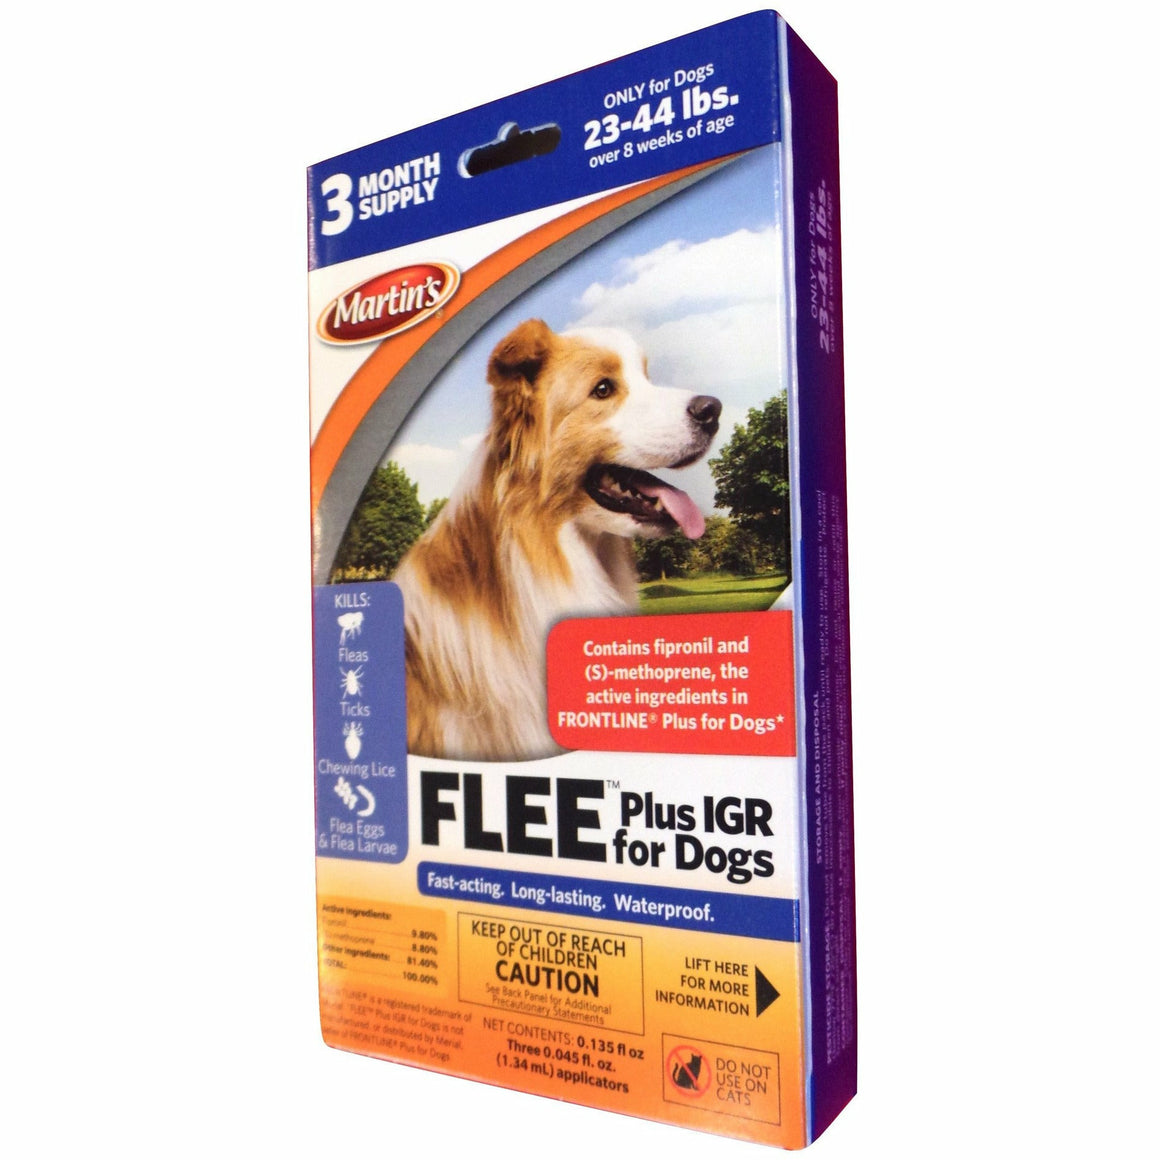 Flee Plus IGR for Dogs 23 - 44 Lbs. - Seed World